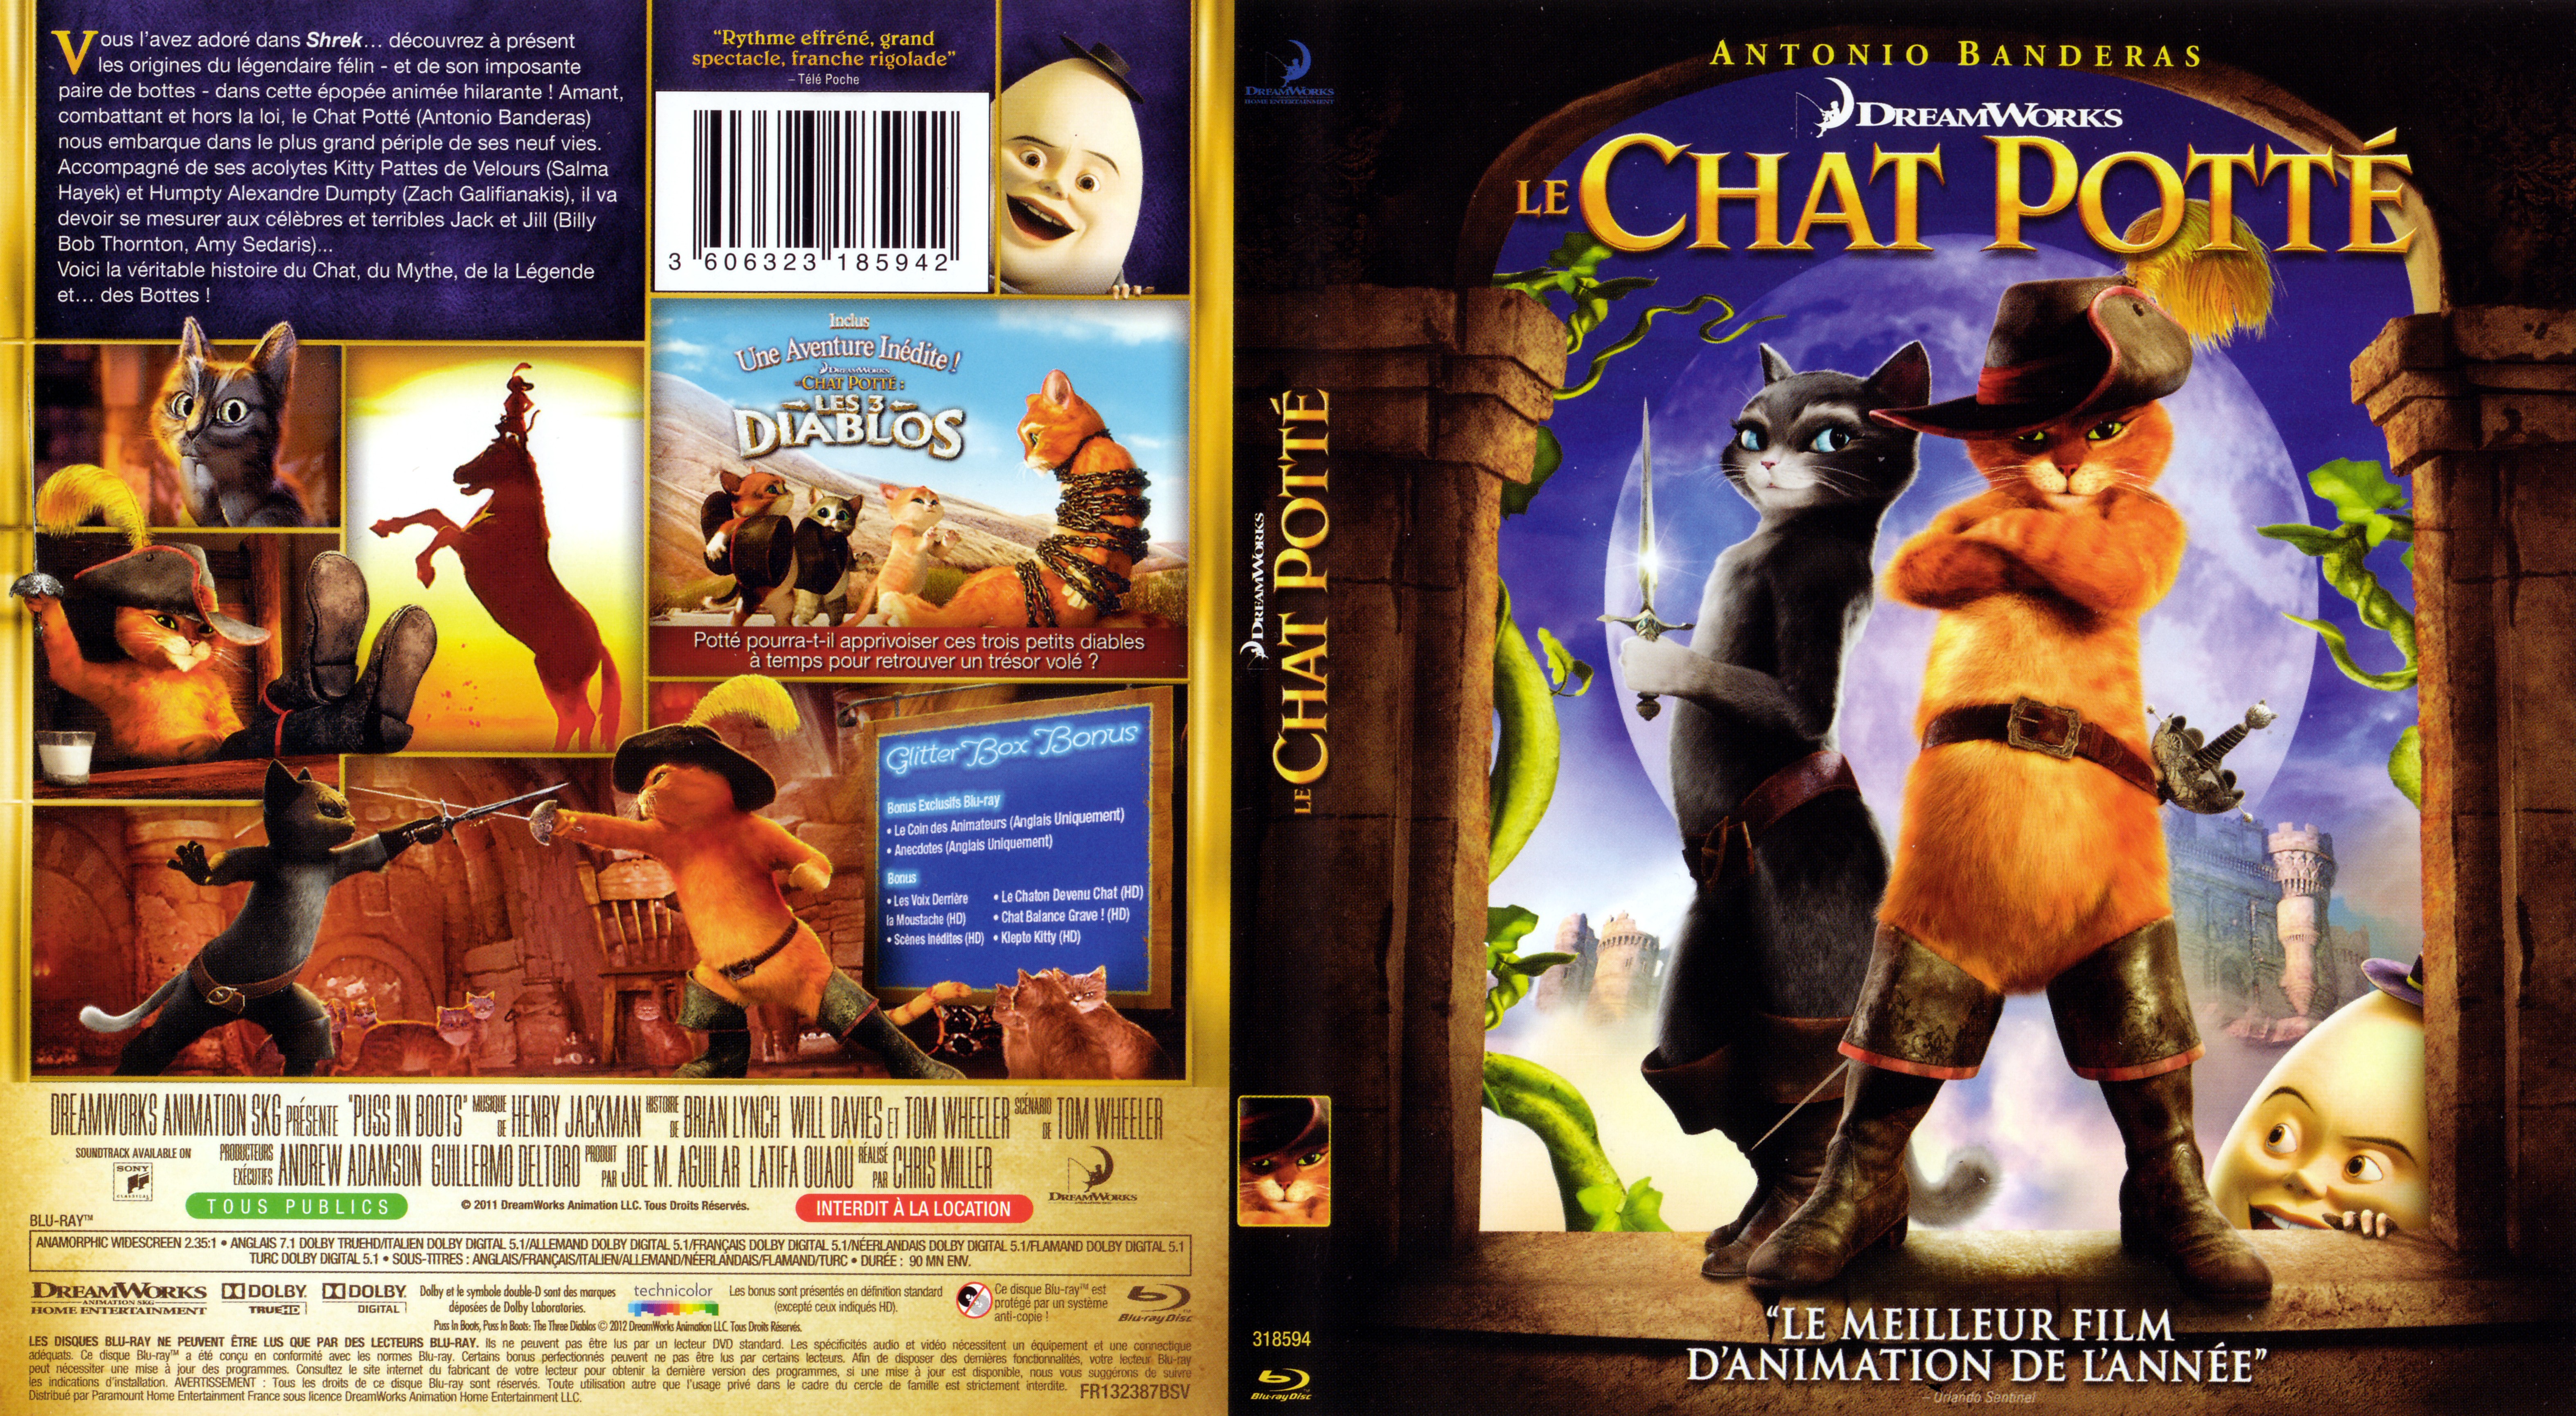 Jaquette DVD Le chat pott (BLU-RAY) v3